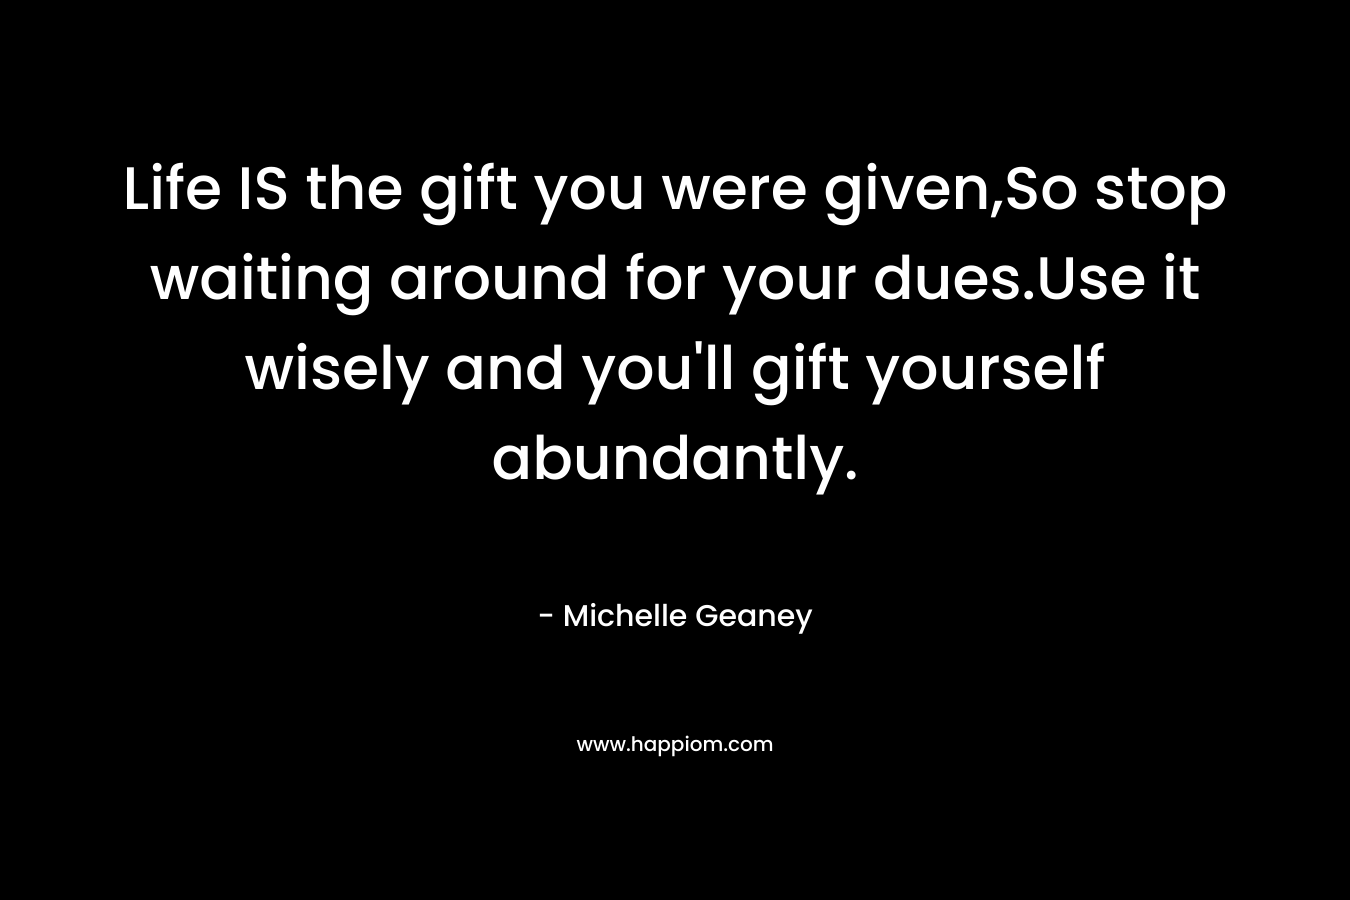 Life IS the gift you were given,So stop waiting around for your dues.Use it wisely and you'll gift yourself abundantly.